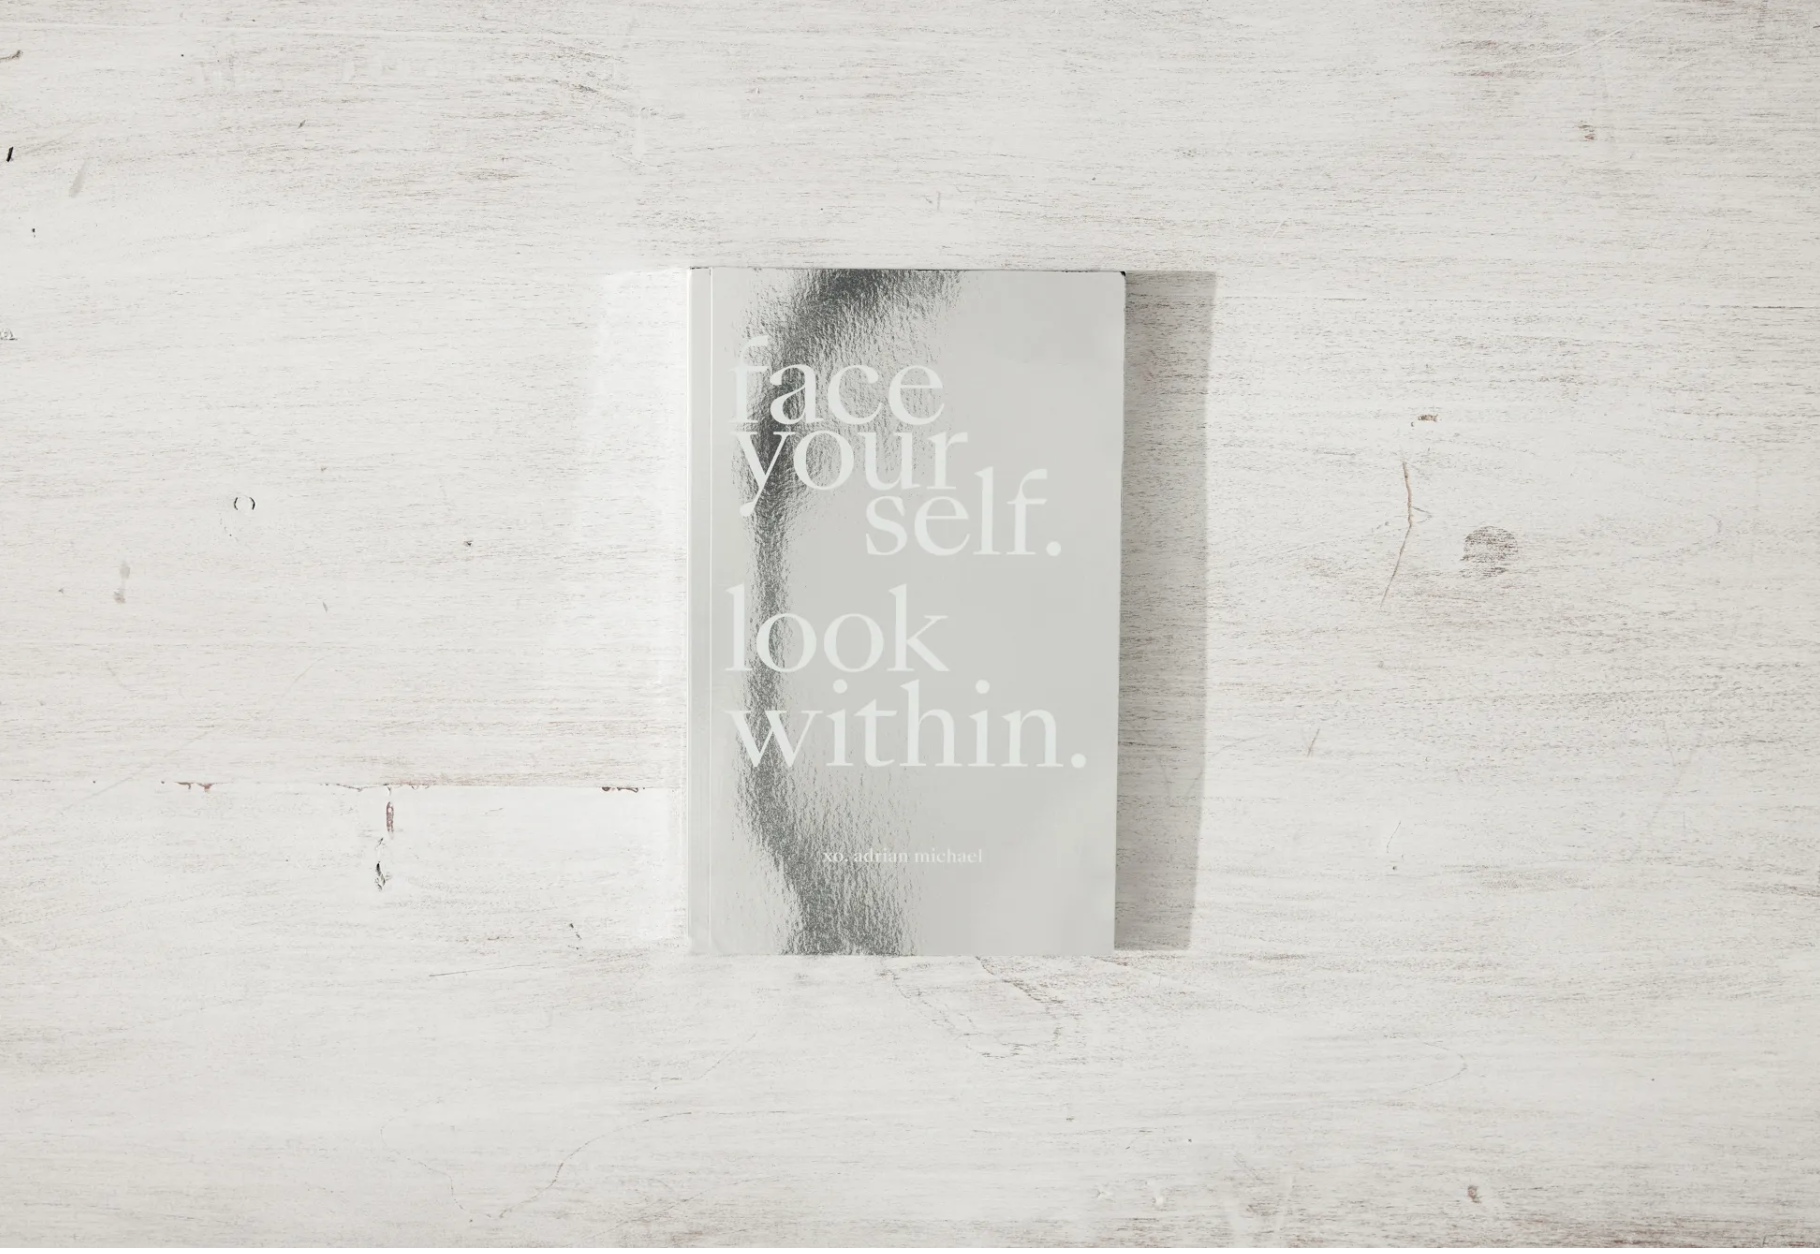 Face Yourself. Look Within